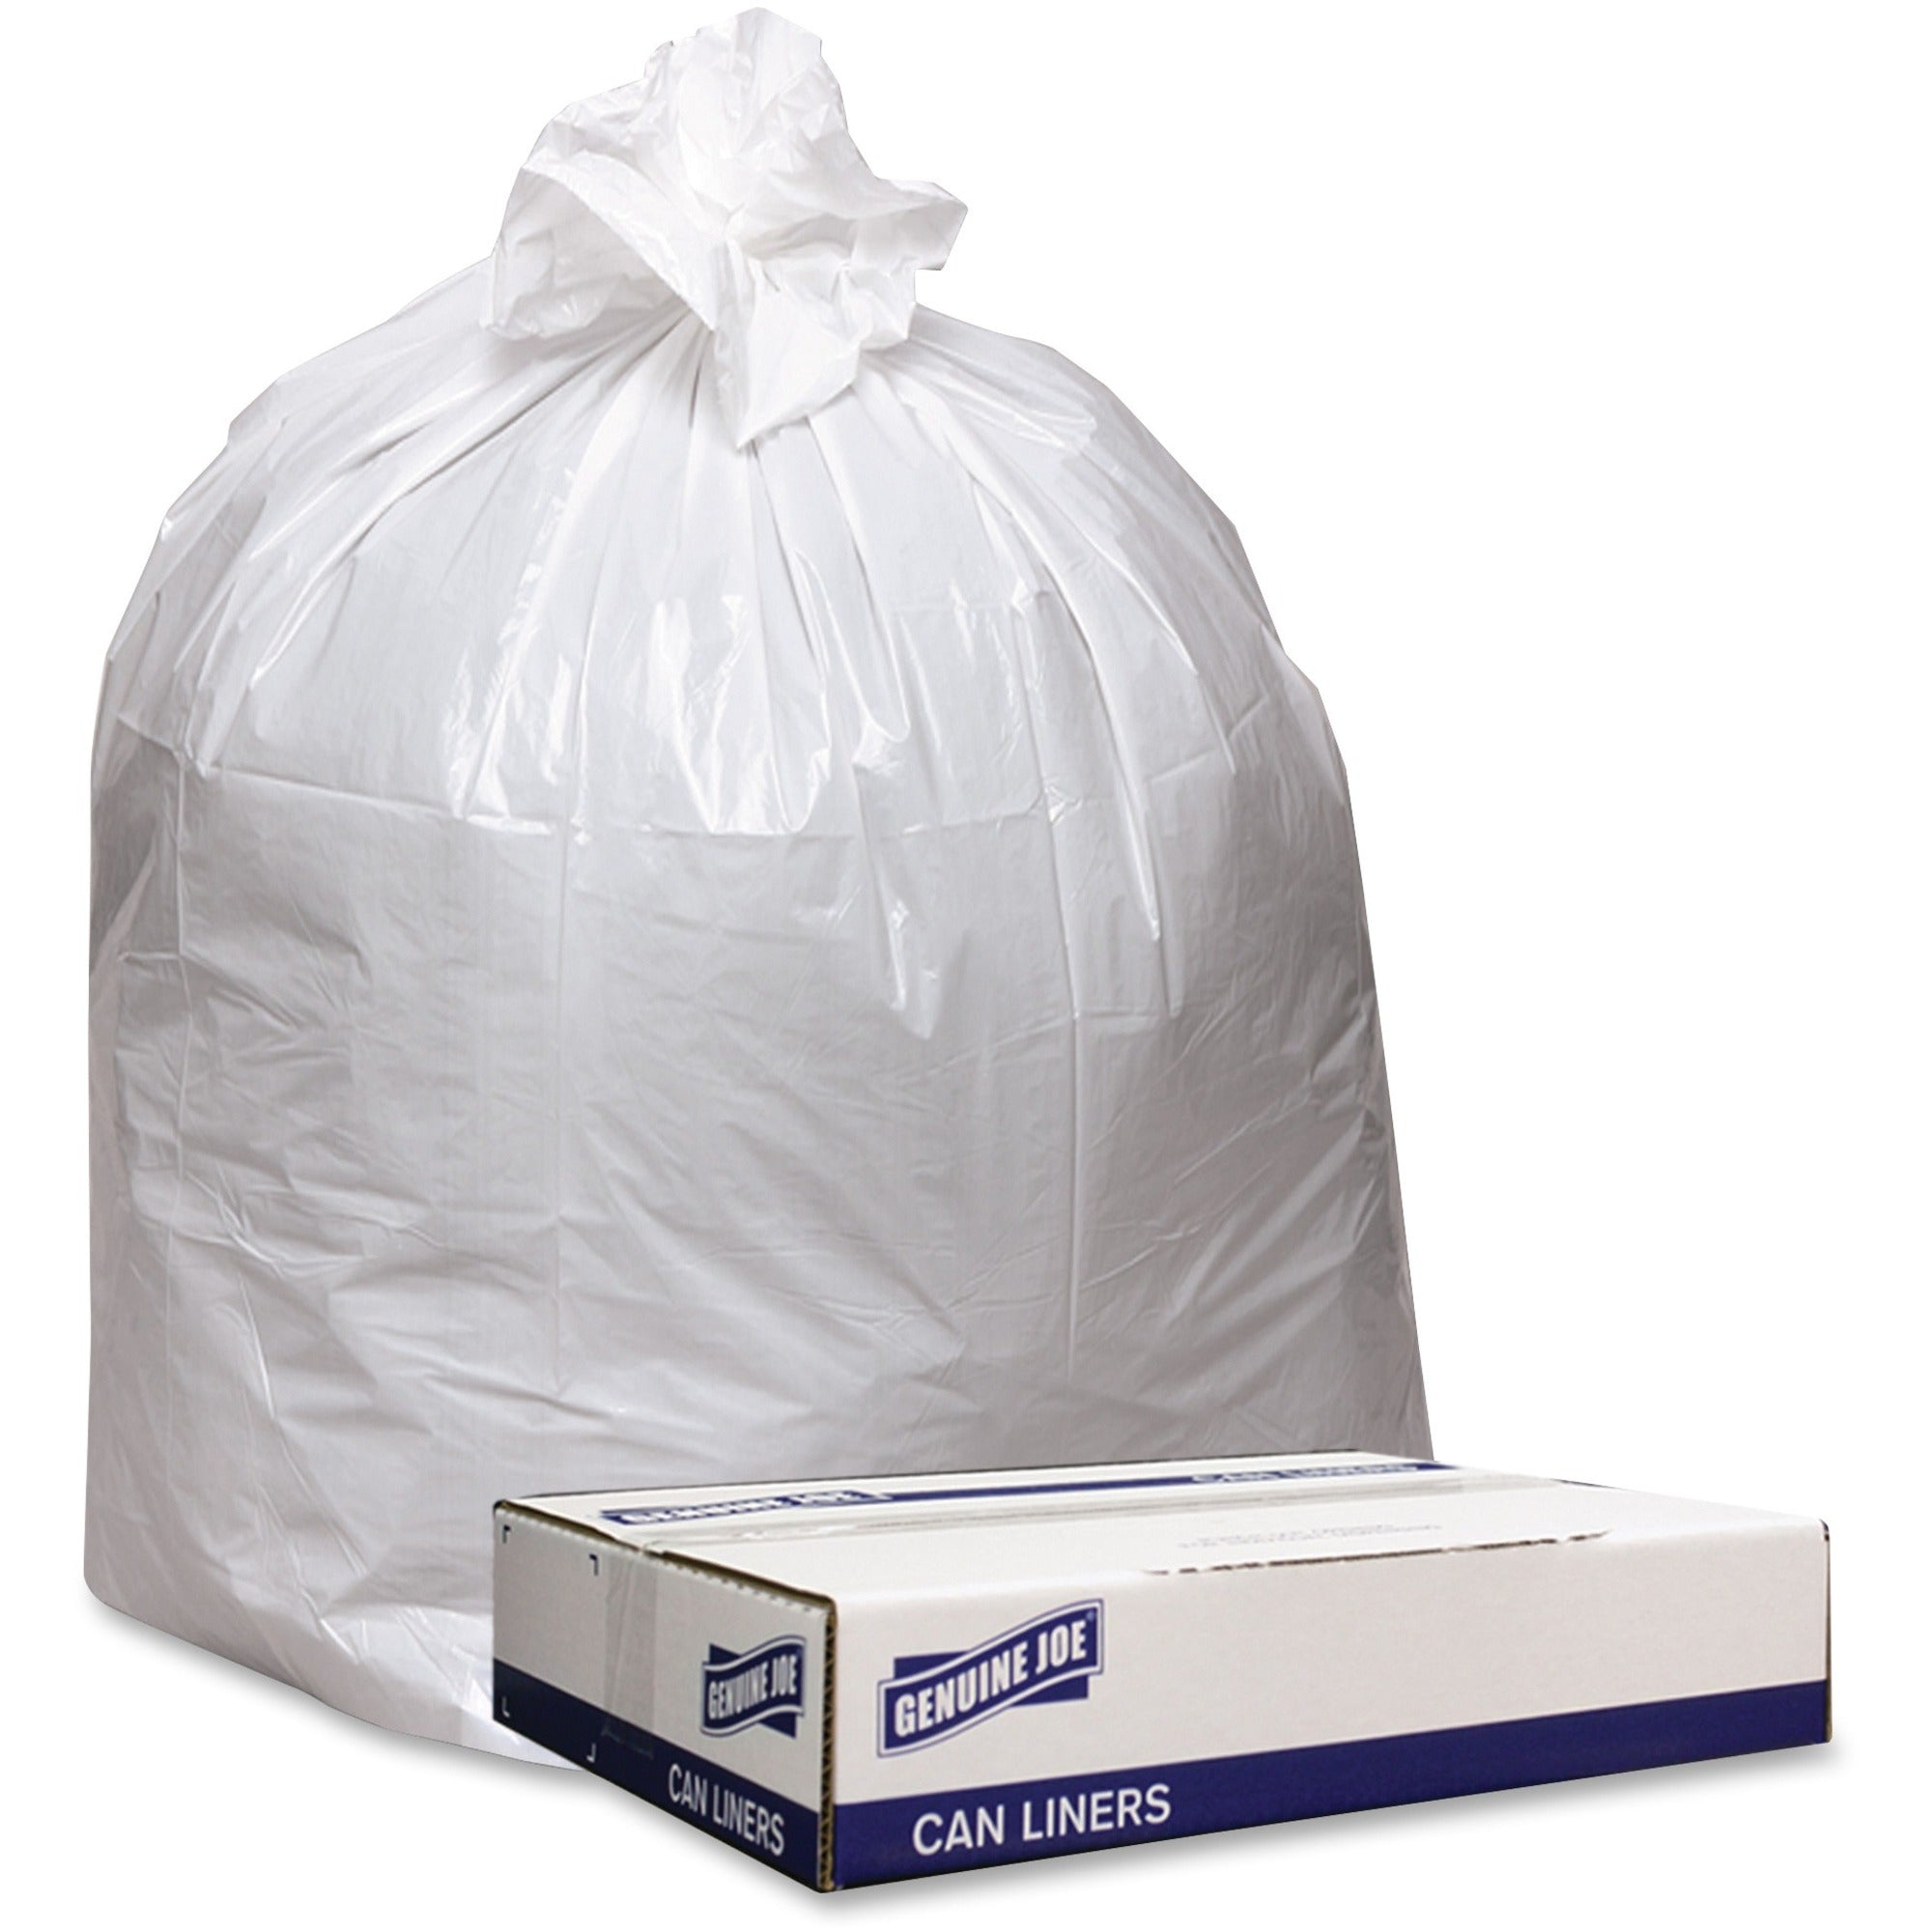 genuine-joe-low-density-white-can-liners-45-gal-capacity-40-width-x-46-length-090-mil-23-micron-thickness-low-density-white-100-carton-industrial-trash-recycled_gjo4046w - 1